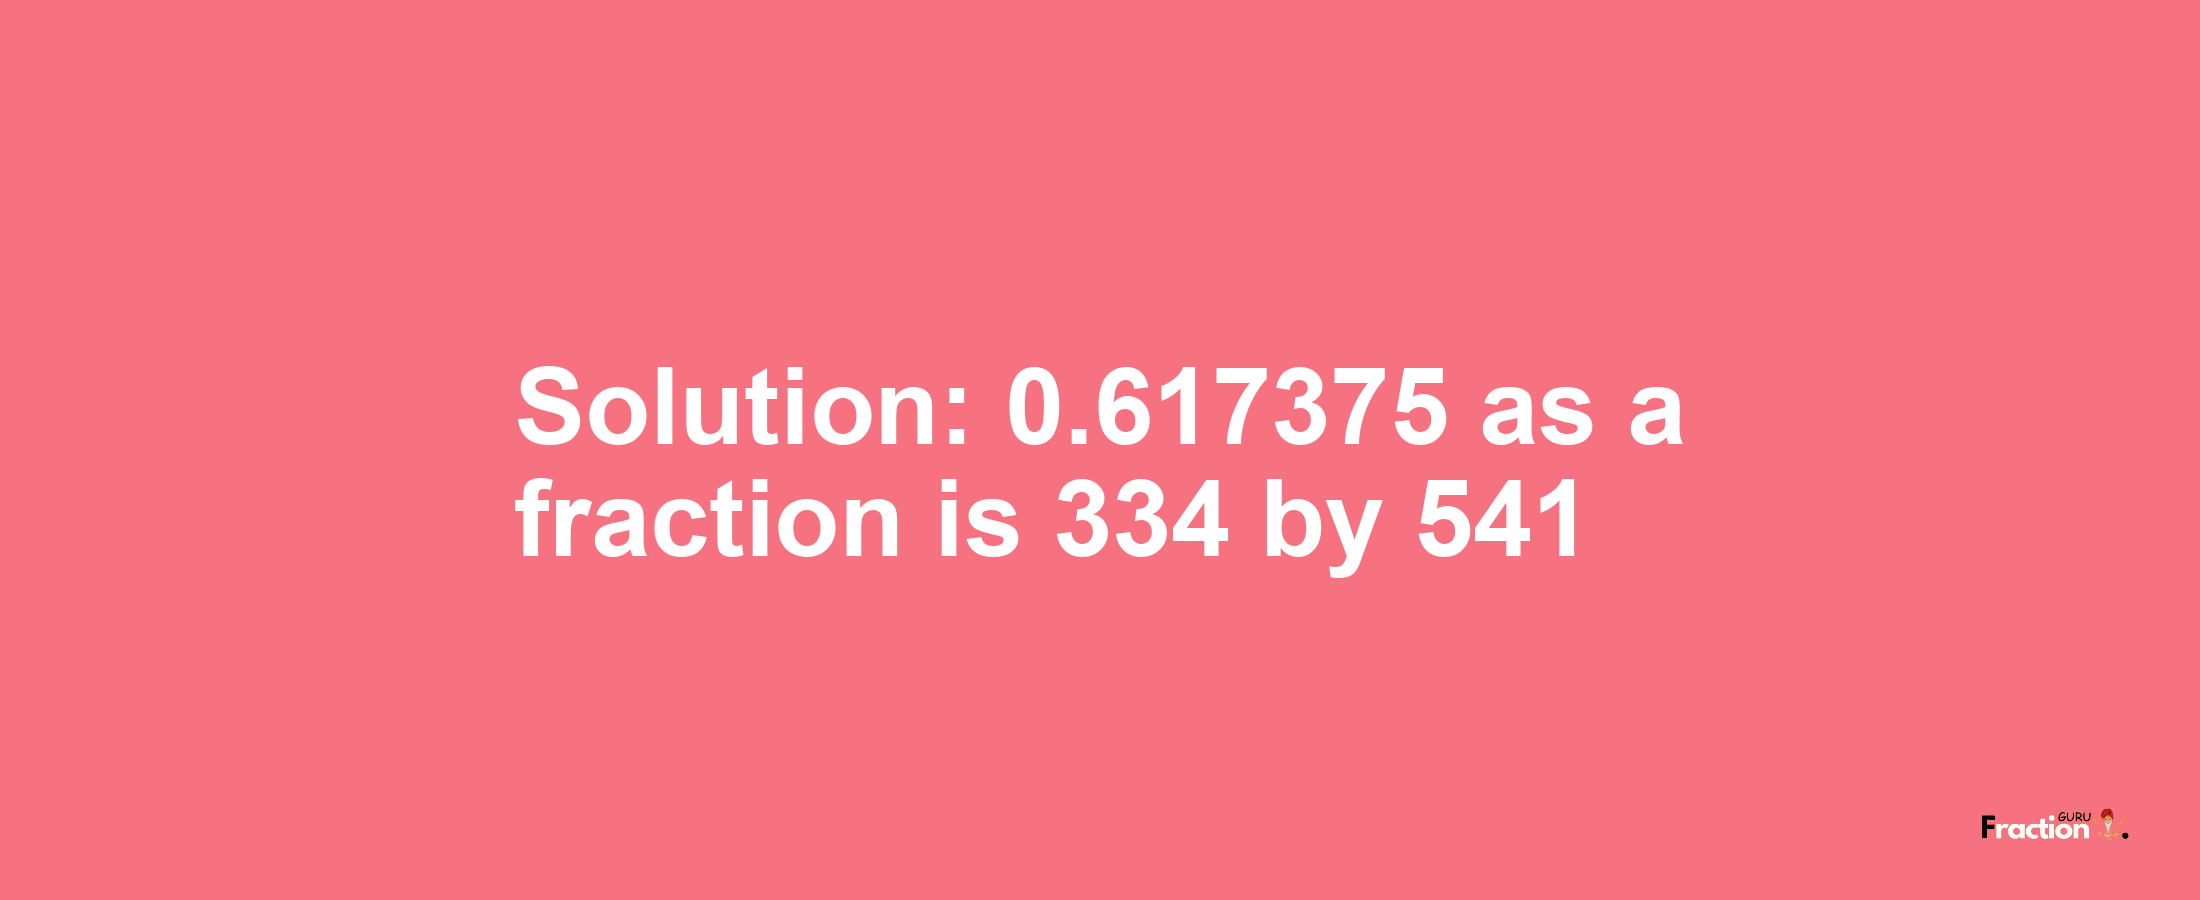 Solution:0.617375 as a fraction is 334/541